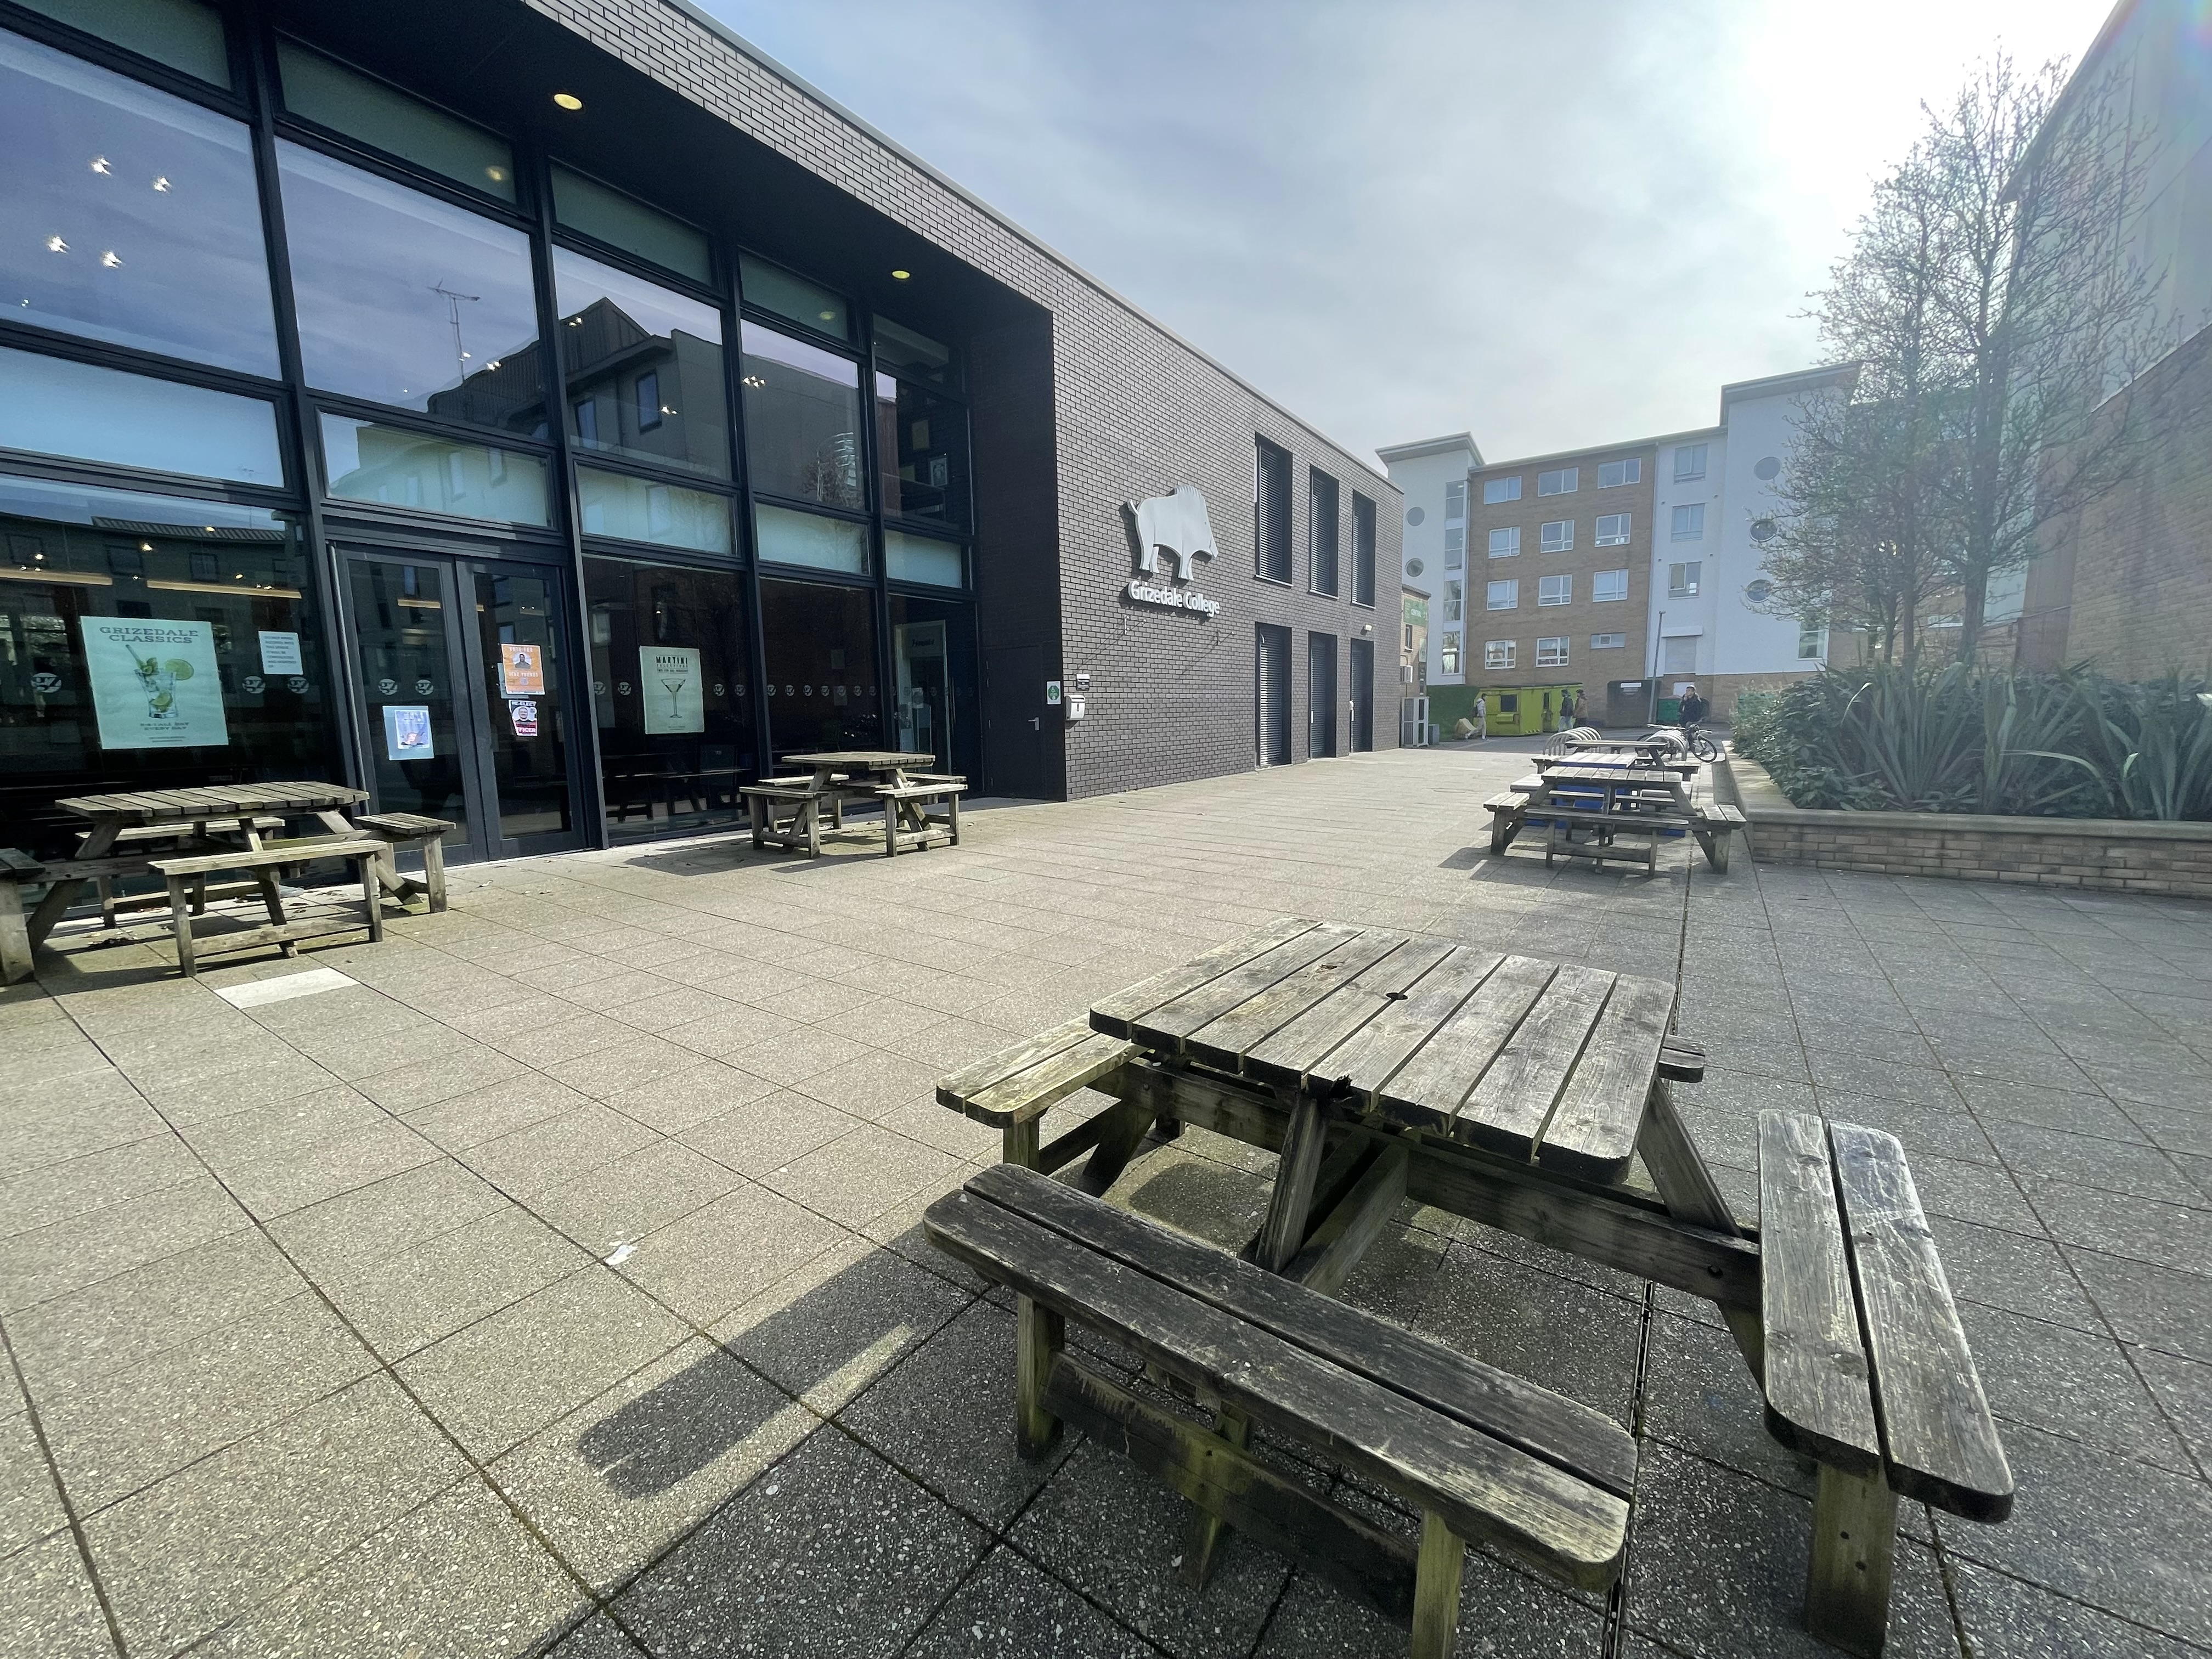 Outside the Grizedale College building, seating areas and benches are in front.
